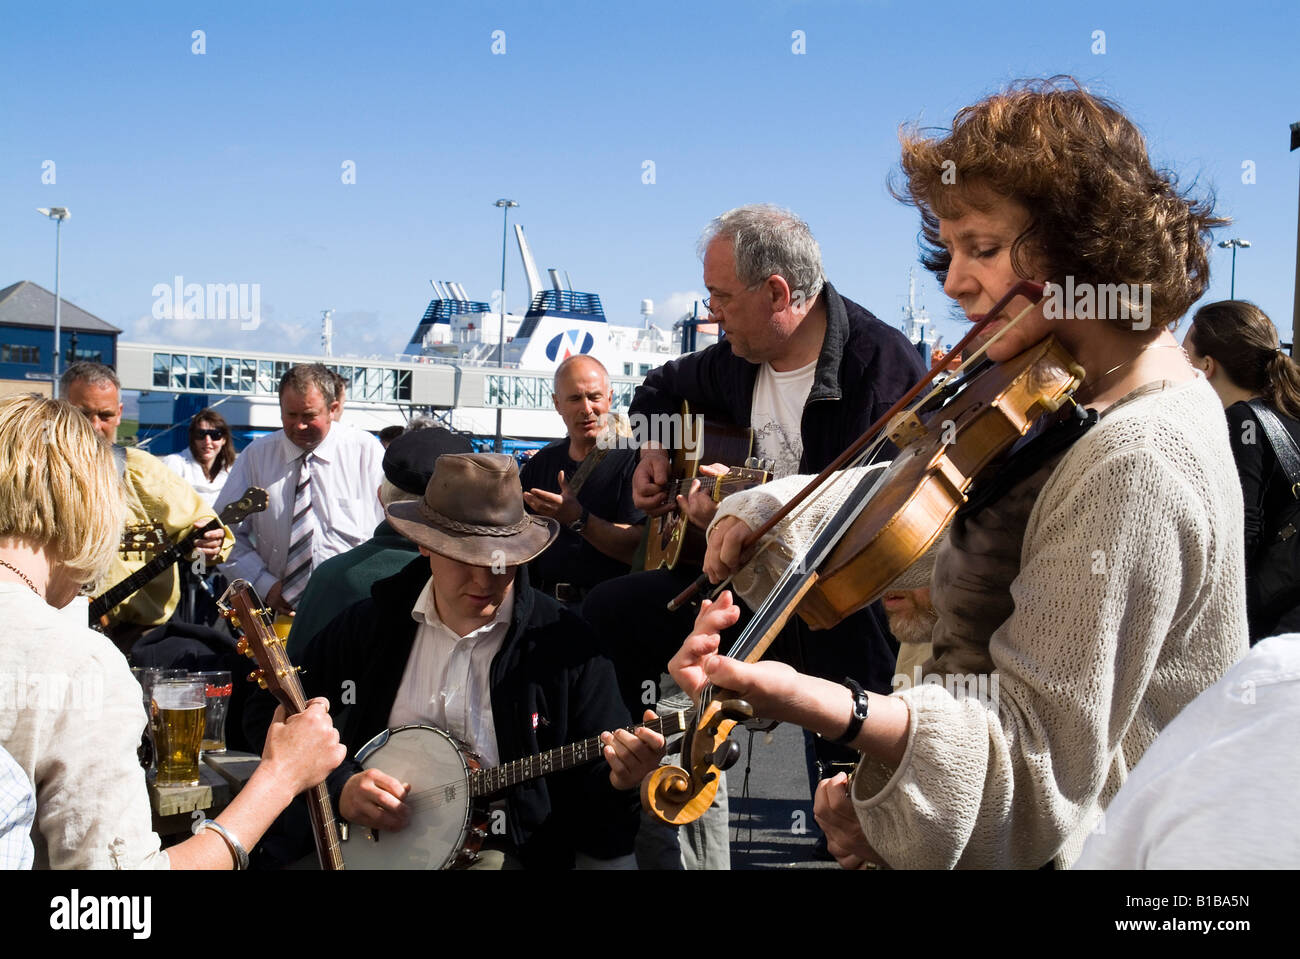 dh Folk Festival Music STROMNESS ORKNEY SCOTLAND Scottish Musicians playing instruments fiddler uk traditional fiddle player instrument festivals Stock Photo